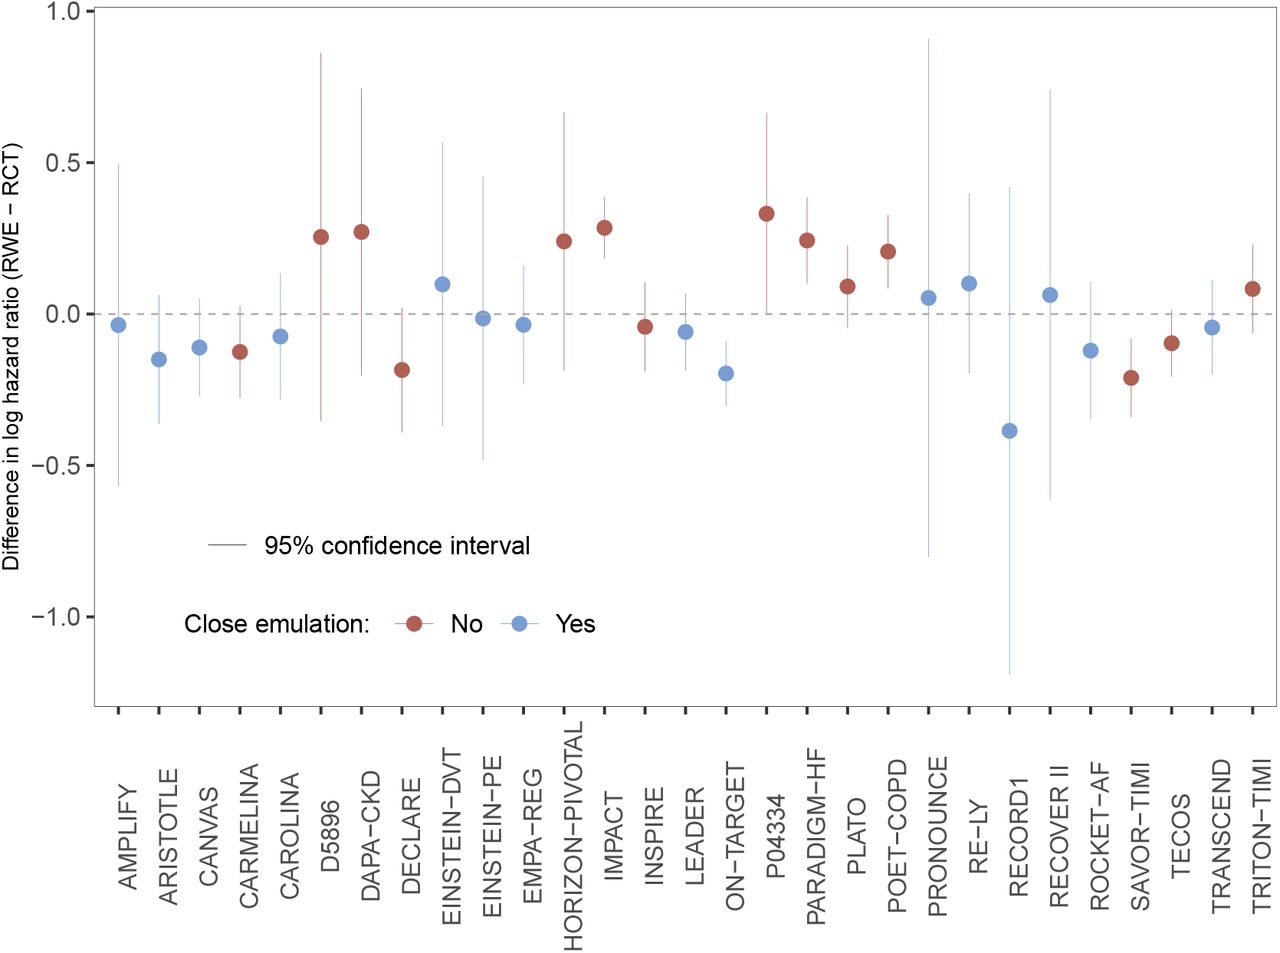 The difference in effect estimates, hazard ratios, observed in the RCT and the pooled RWE depending on whether it was a close emulation or not. The horizontal line represents a scenario of no difference between RWE and RCT estimates.